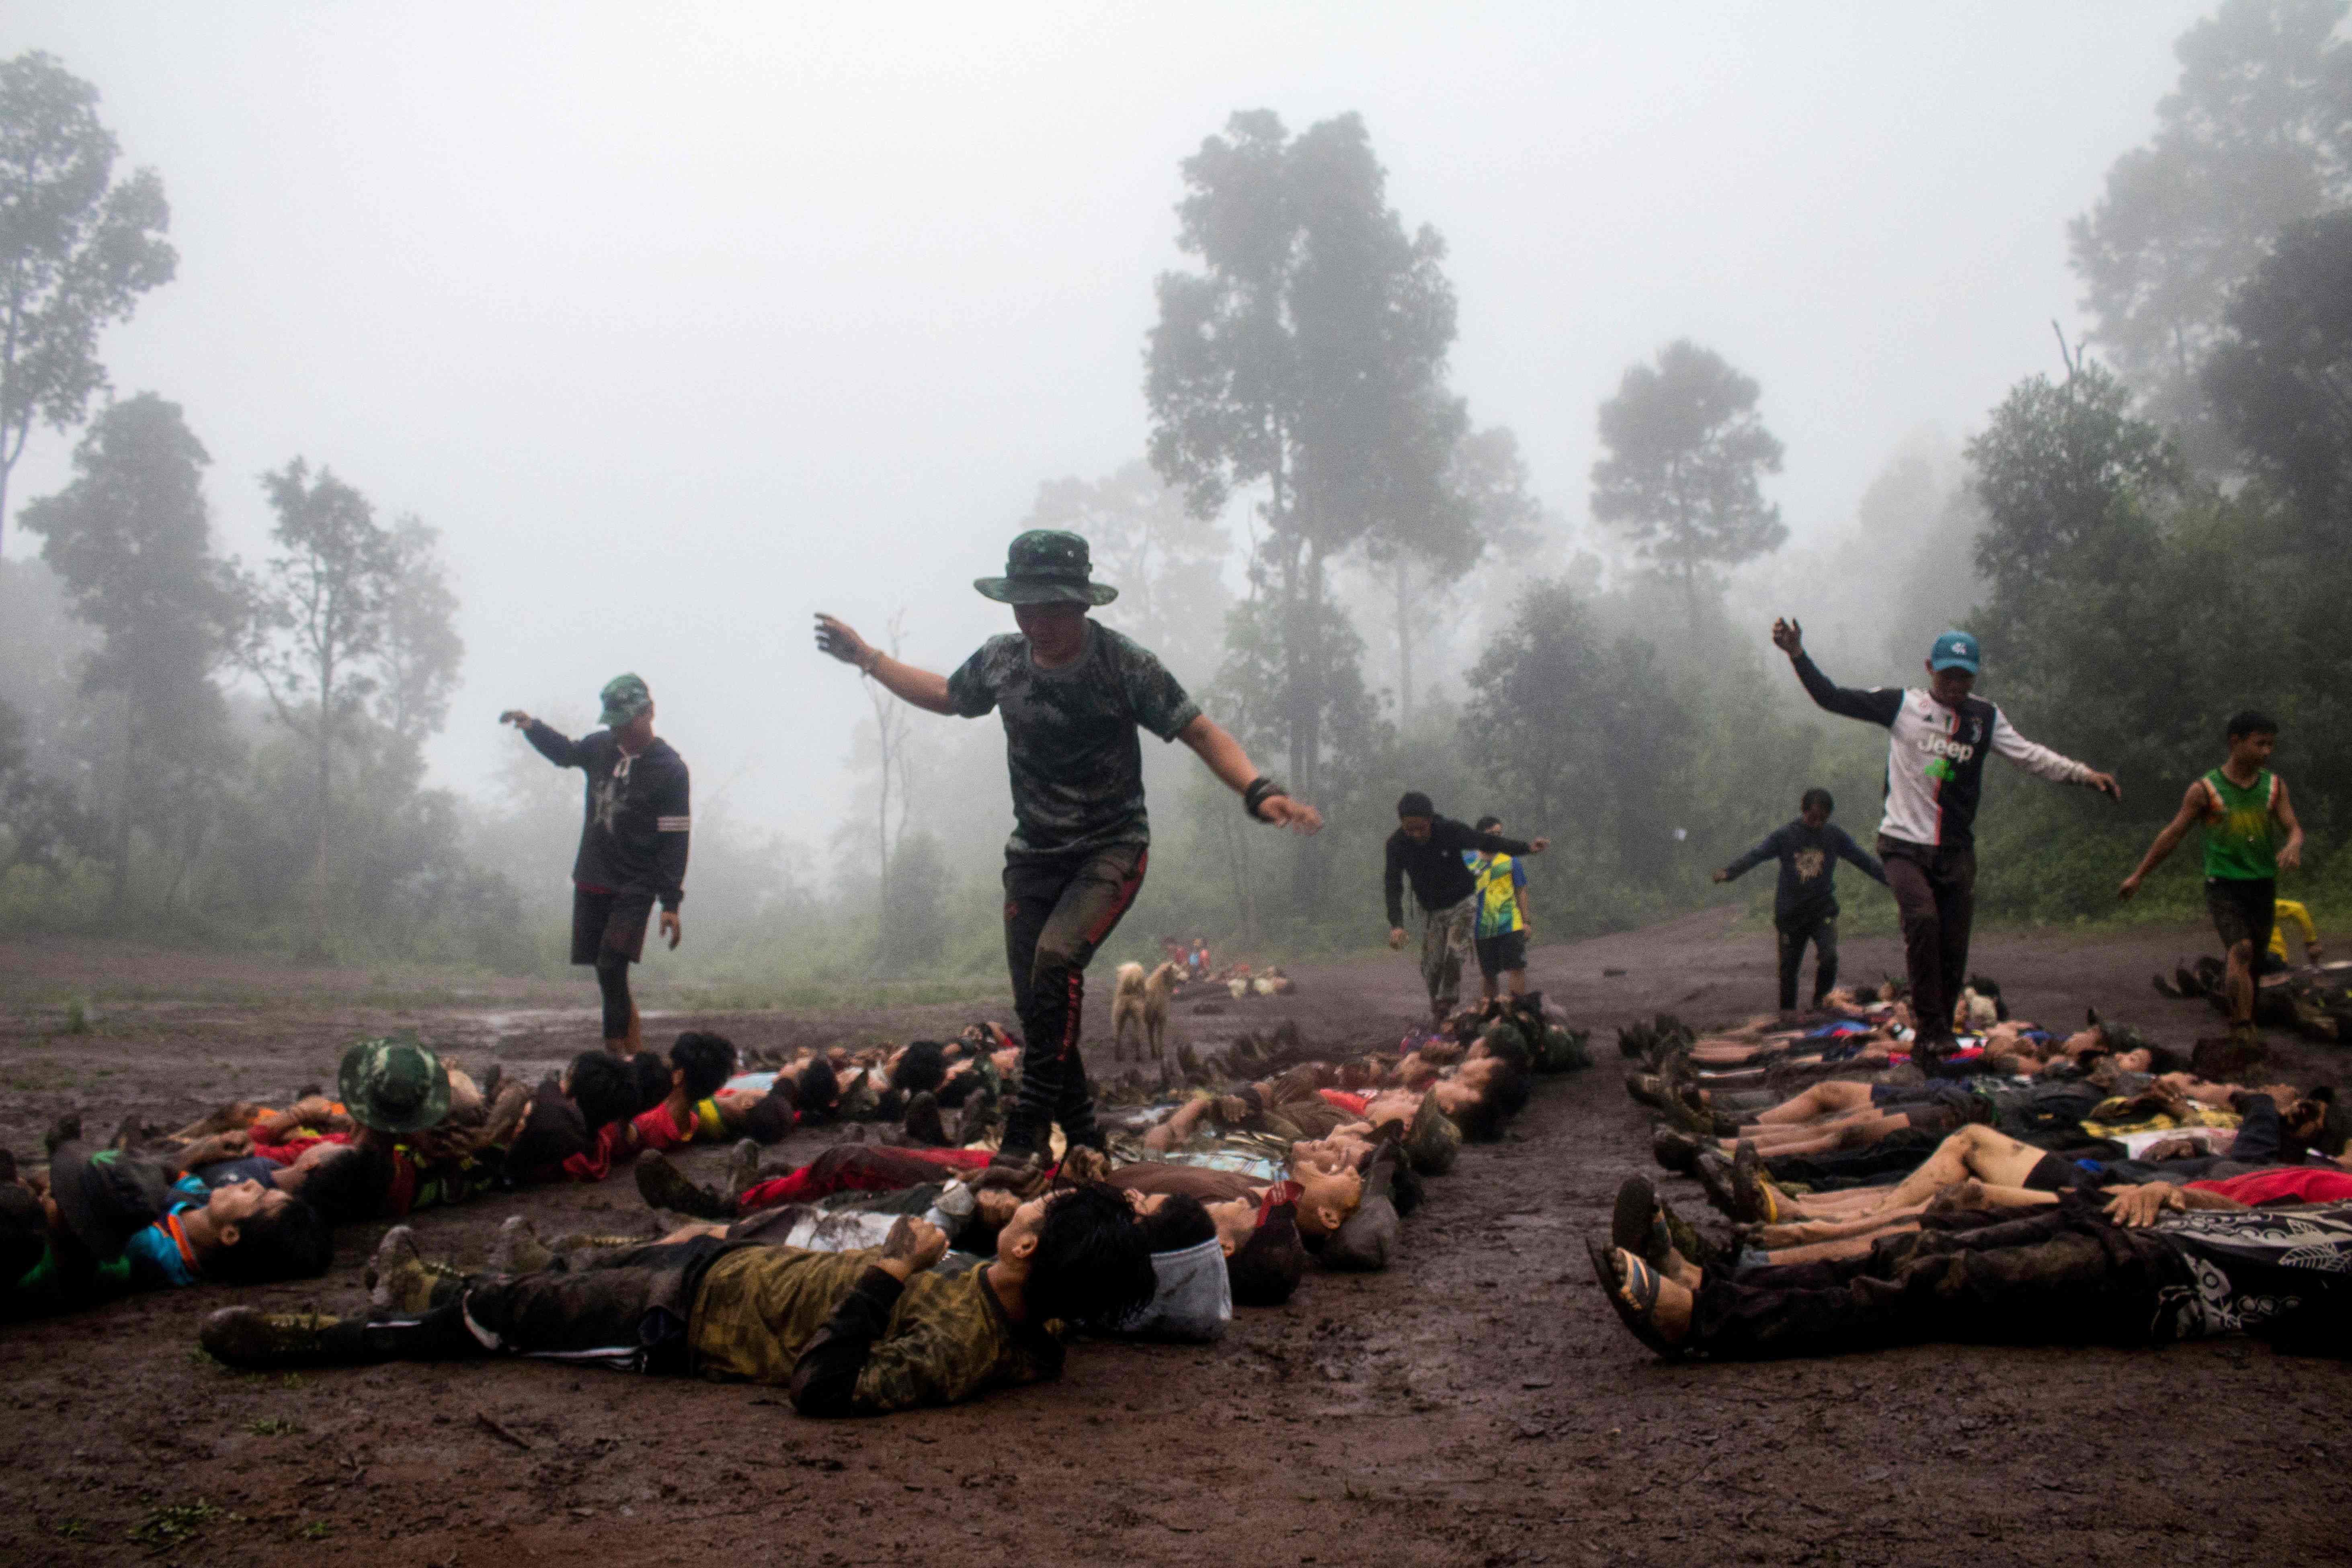 In this file photo taken on 16 October 2021, members of the Karenni Nationalities Defence Force take part in training at their base camp in the forest near Demoso in Kayah